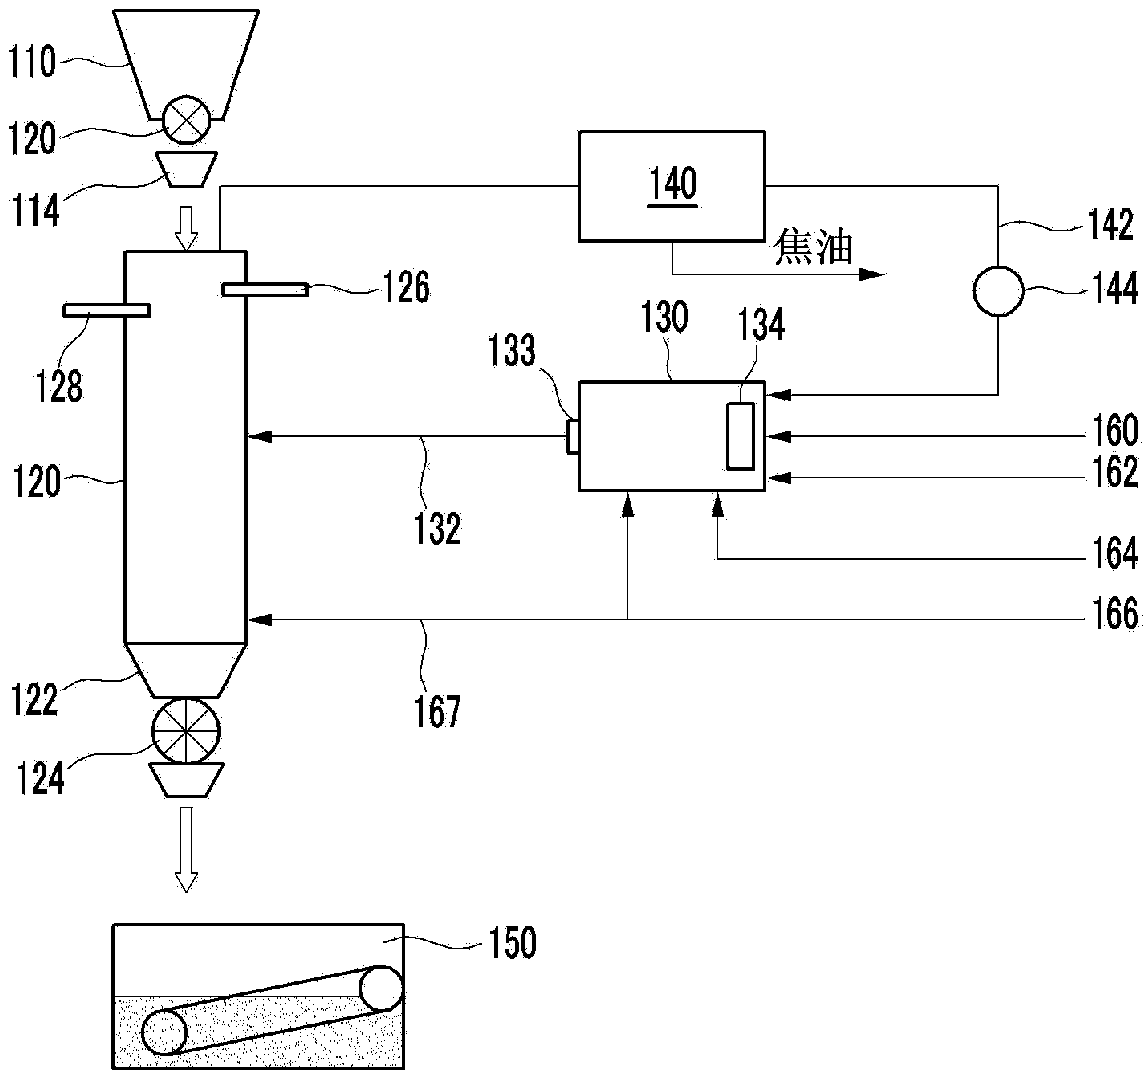 Method for manufacturing partially carbonized coal briquettes, apparatus for manufacturing partially carbonized coal briquettes, and apparatus for manufacturing molten iron